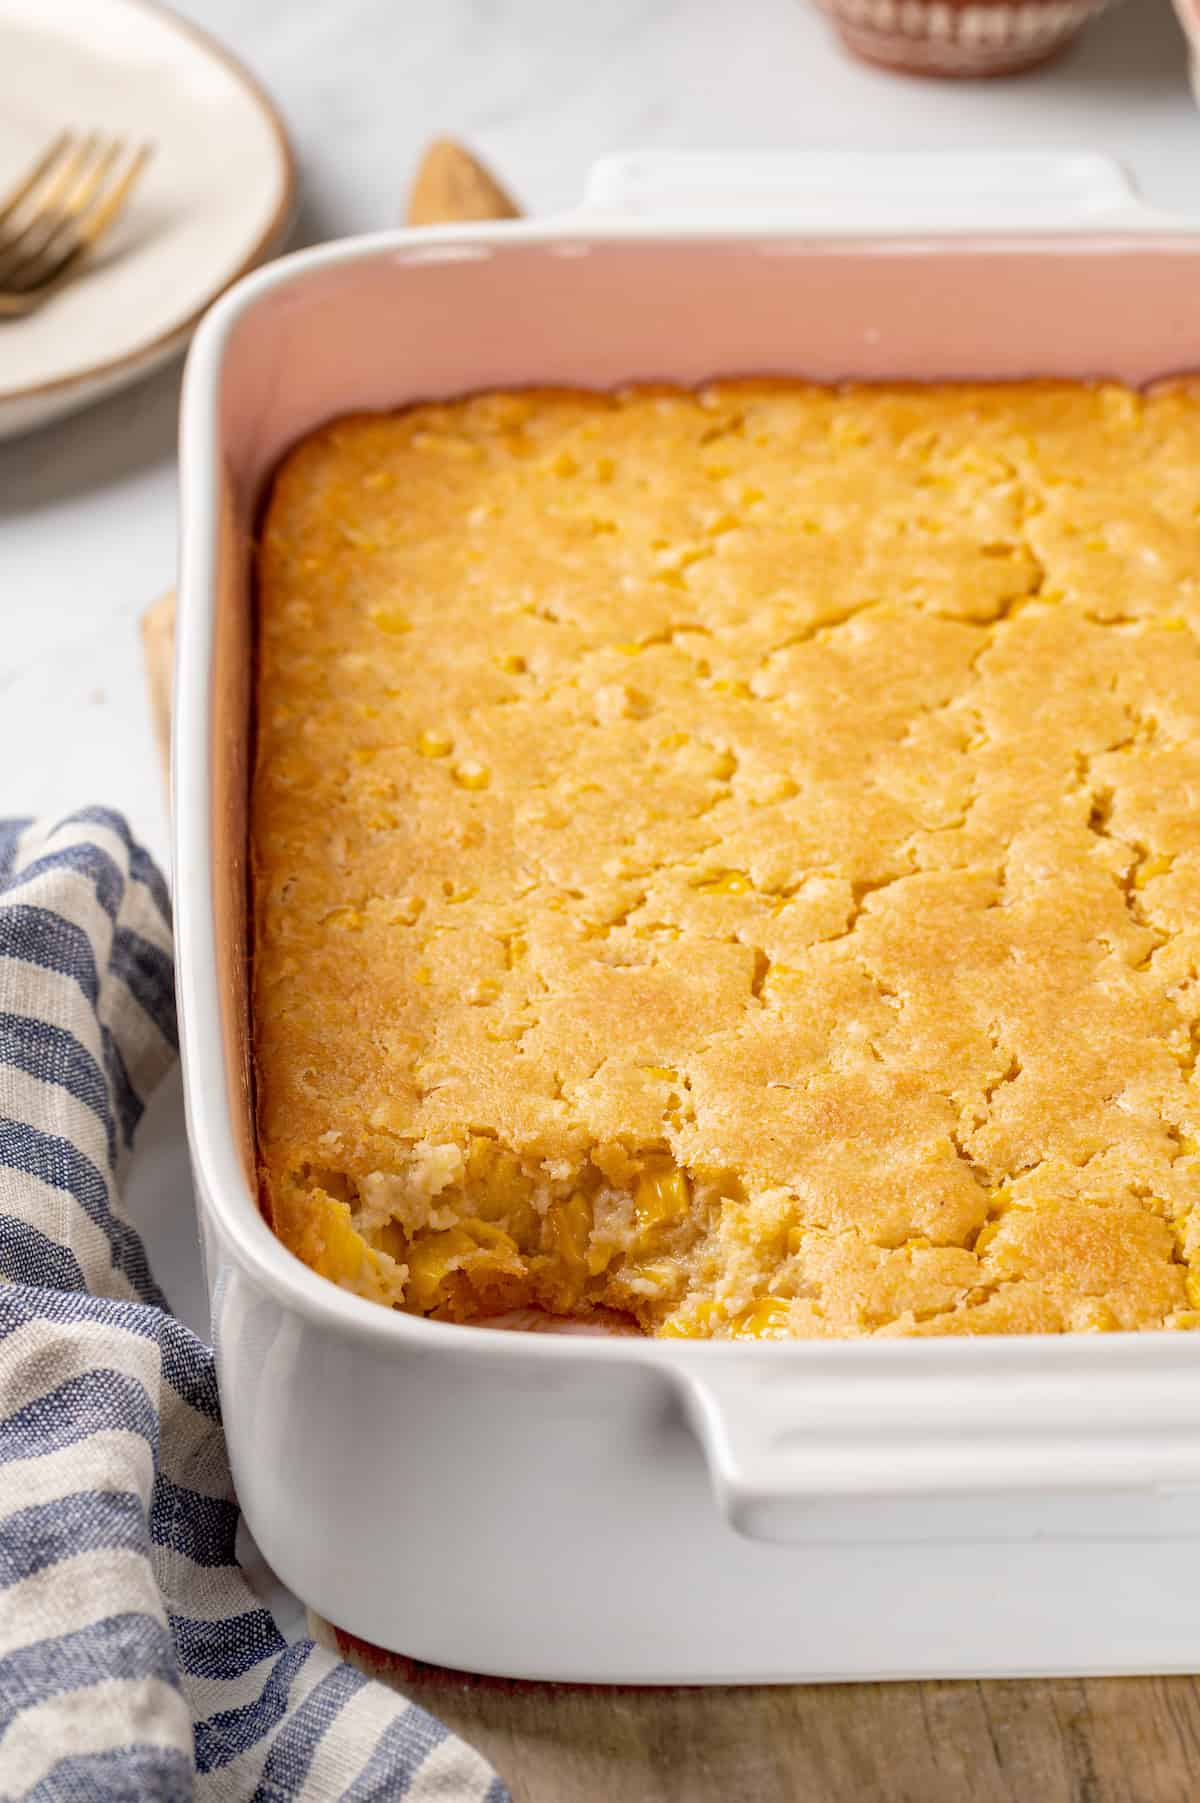 Corn souffle in baking dish with portion removed, showing fluffy texture